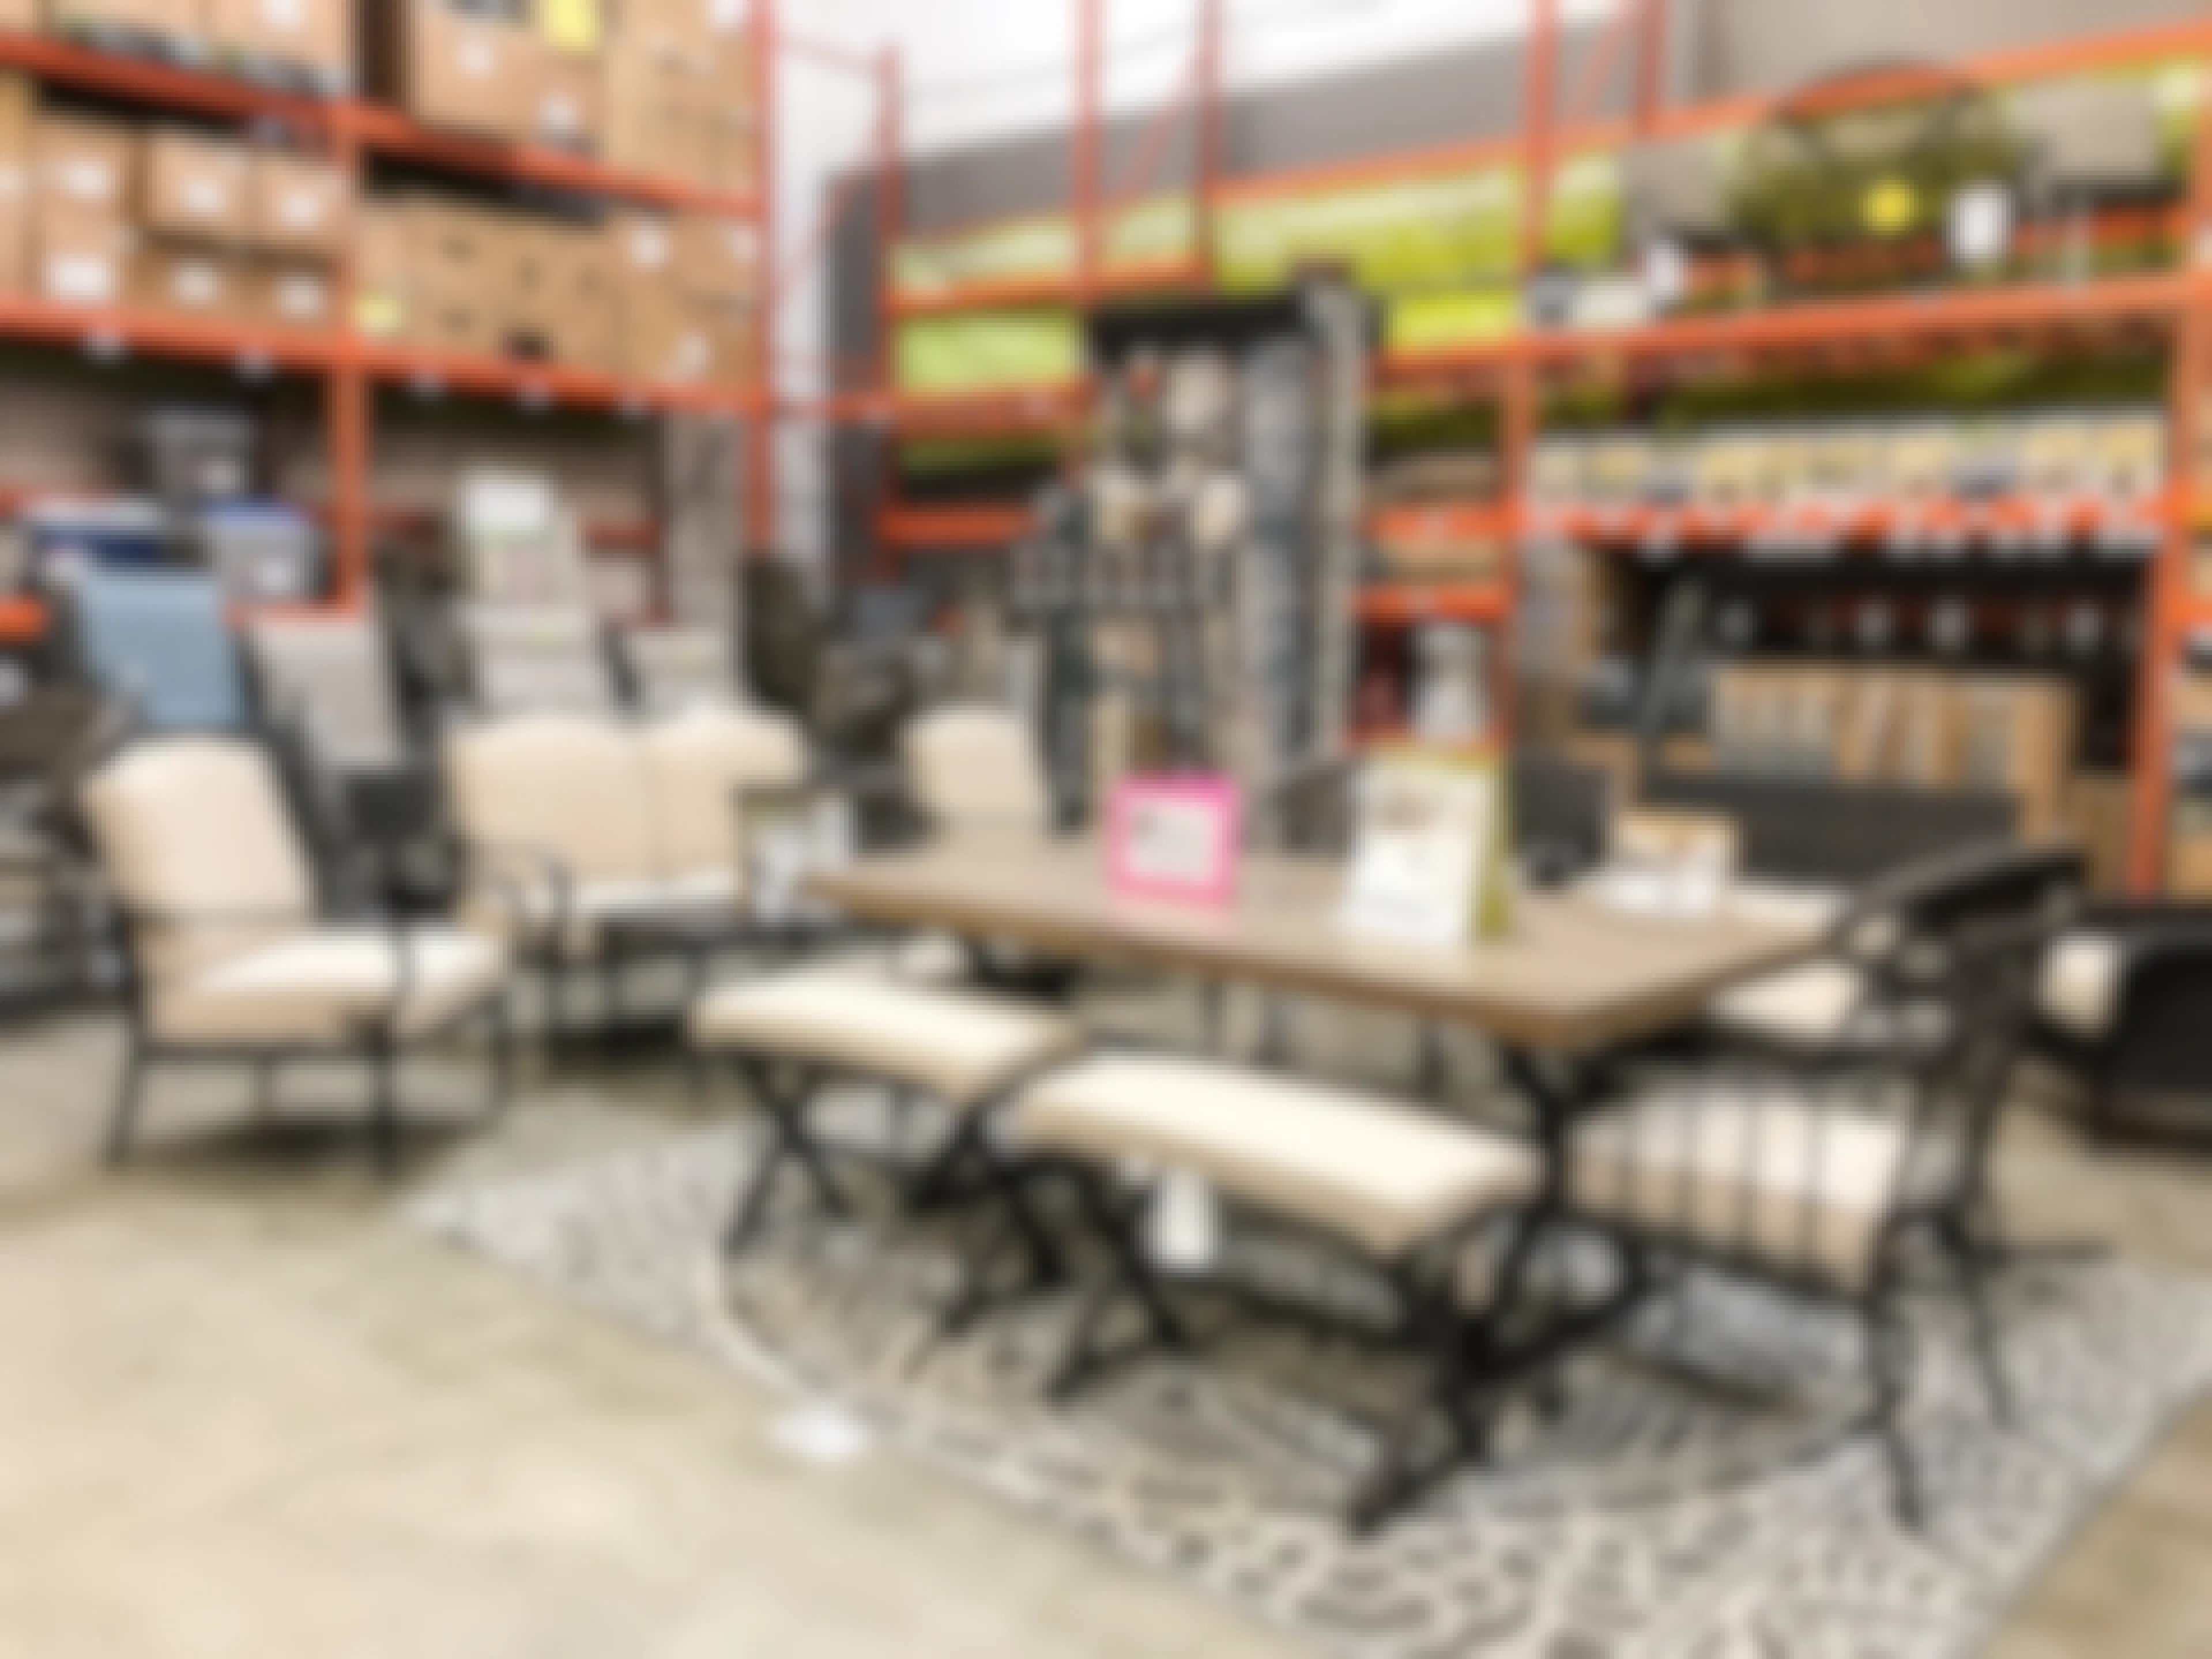 Patio furniture for sale at Home Depot.